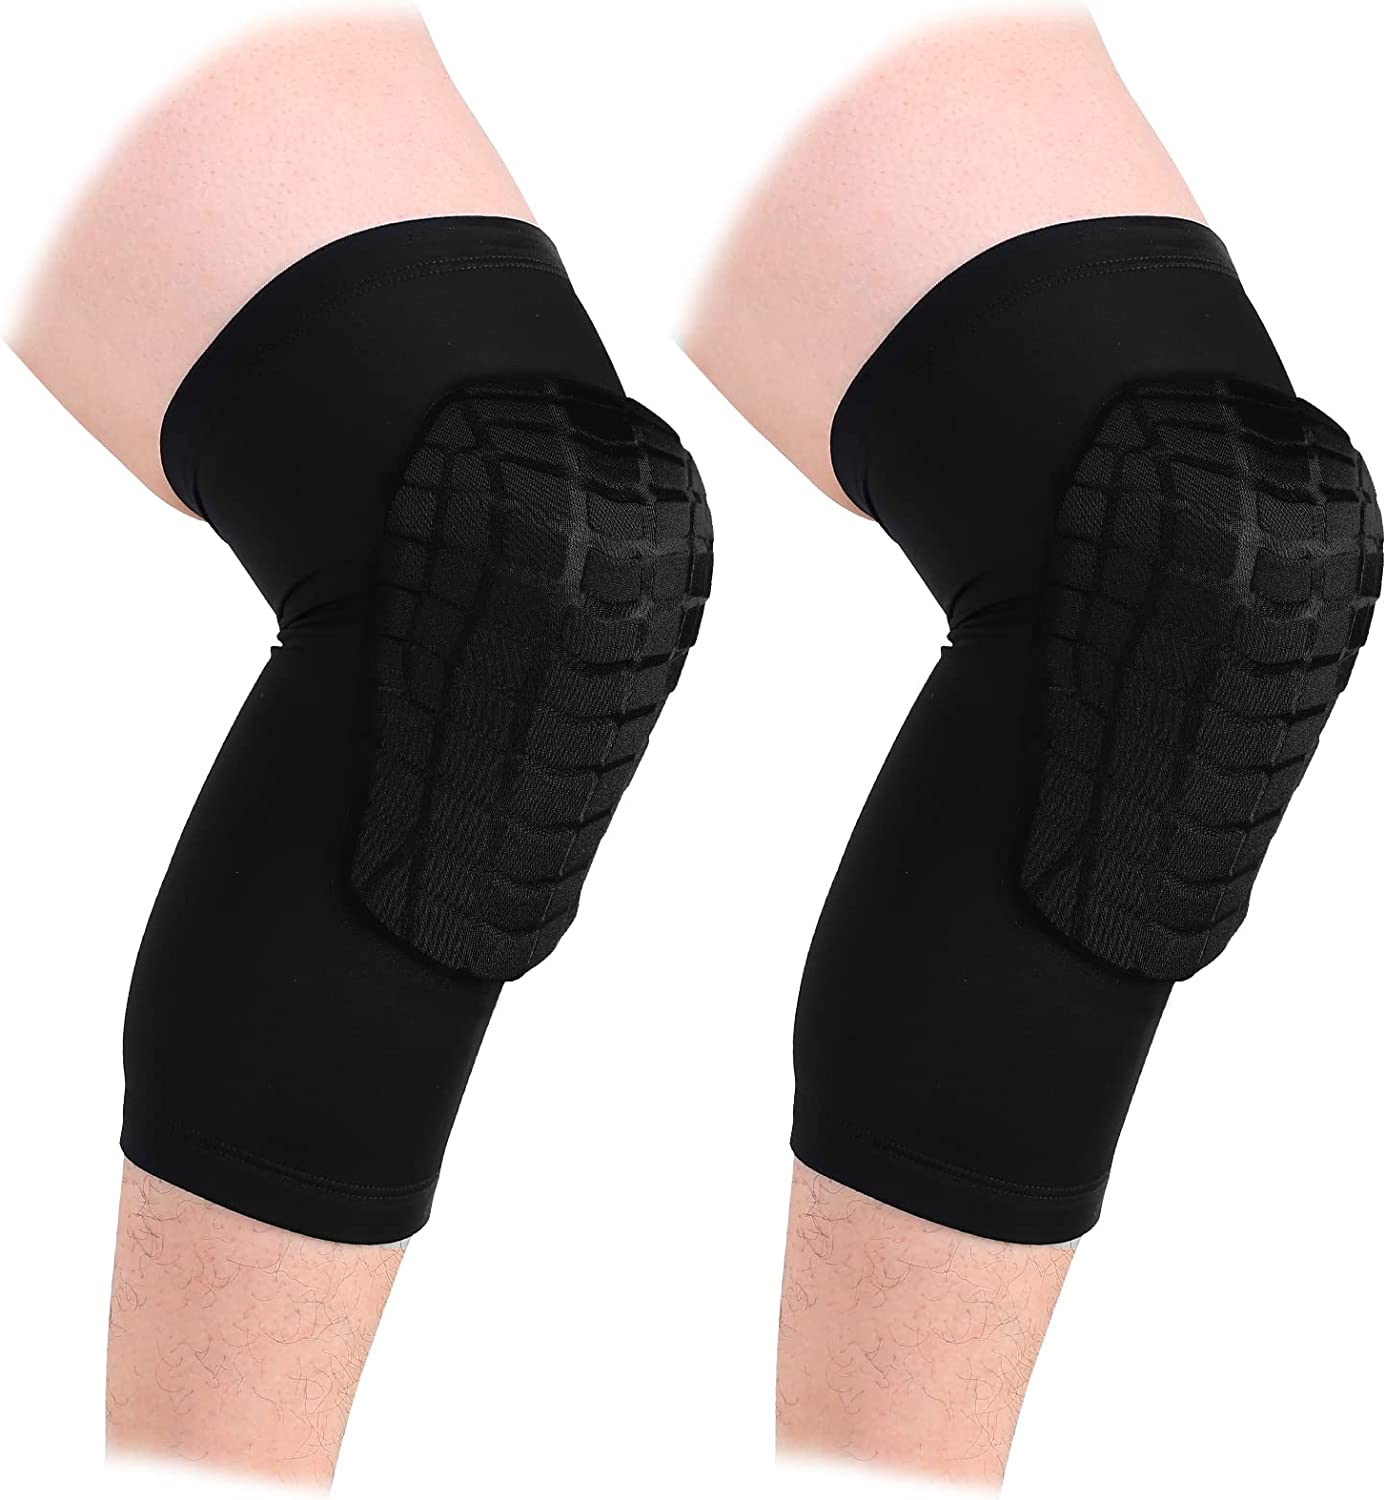  6. Cantop Basketball Knee Pads With Leg Sleeve Kneepad Knee Support 